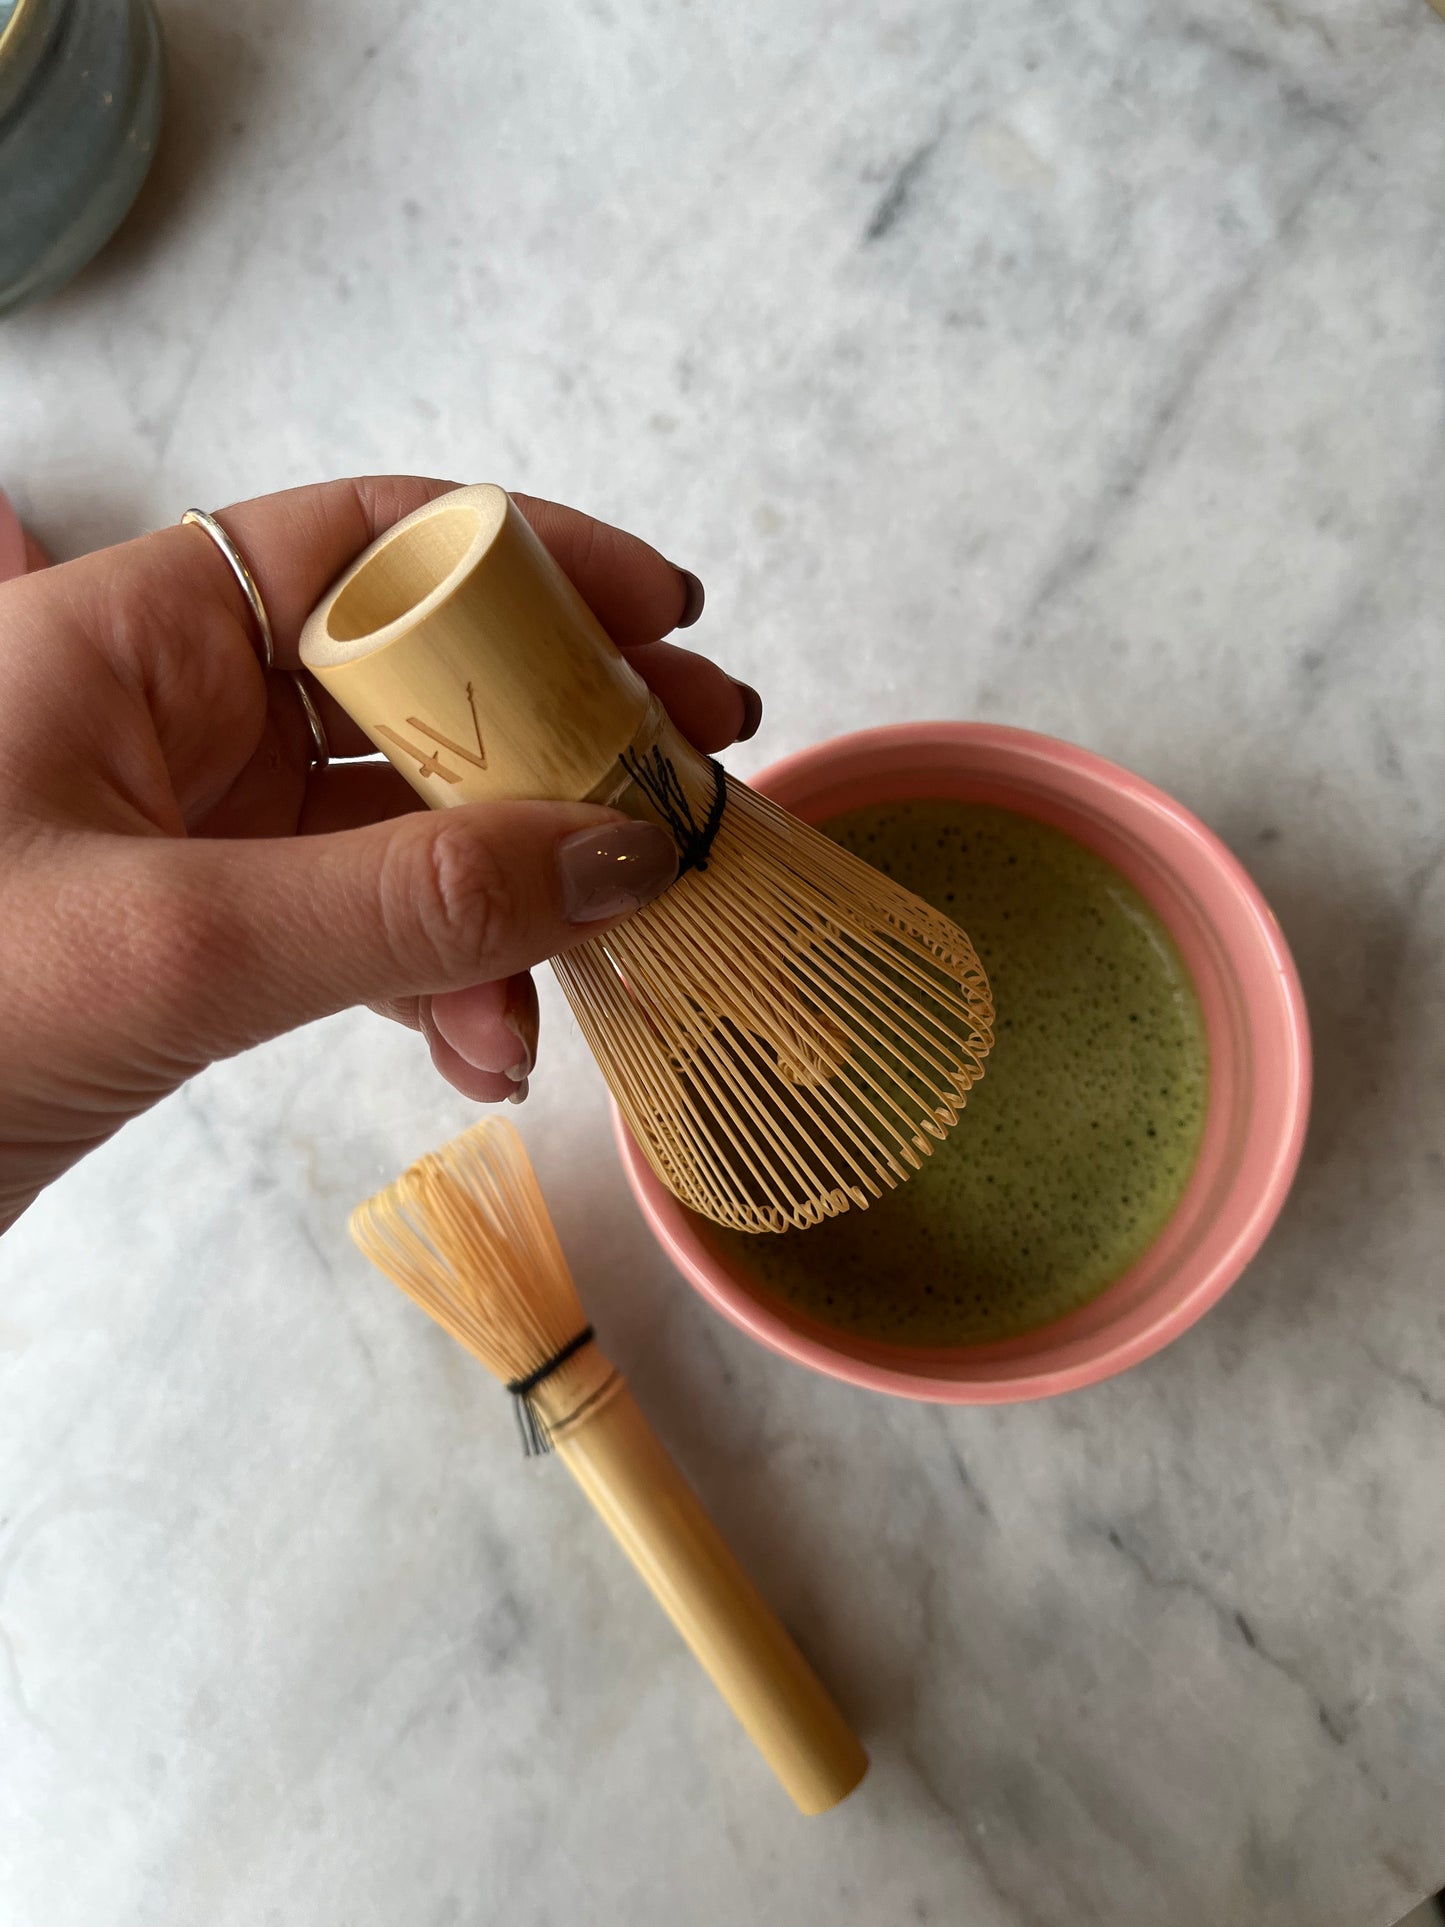 Traditional matcha whisk (chasen)